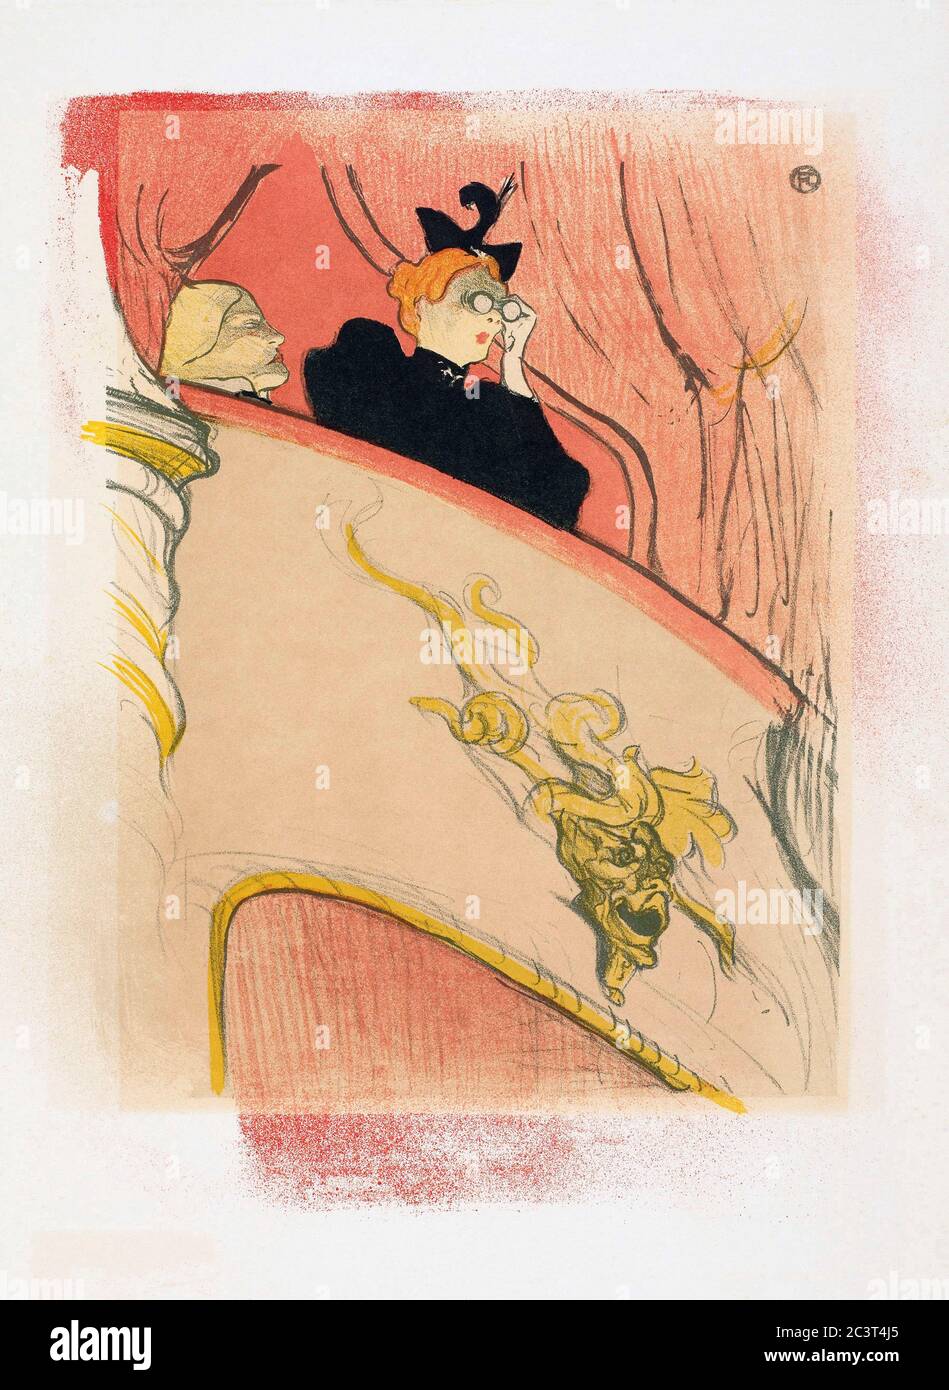 The Box with the Gilded Mask. Poster by Henri de Toulouse-Lautrec. Henri de Toulouse-Lautrec, French artist, 1864-1901.  The poster was originally designed as a program for Marcel Luguet's 'Le Missionnaire' at the Théâtre Libre. Stock Photo